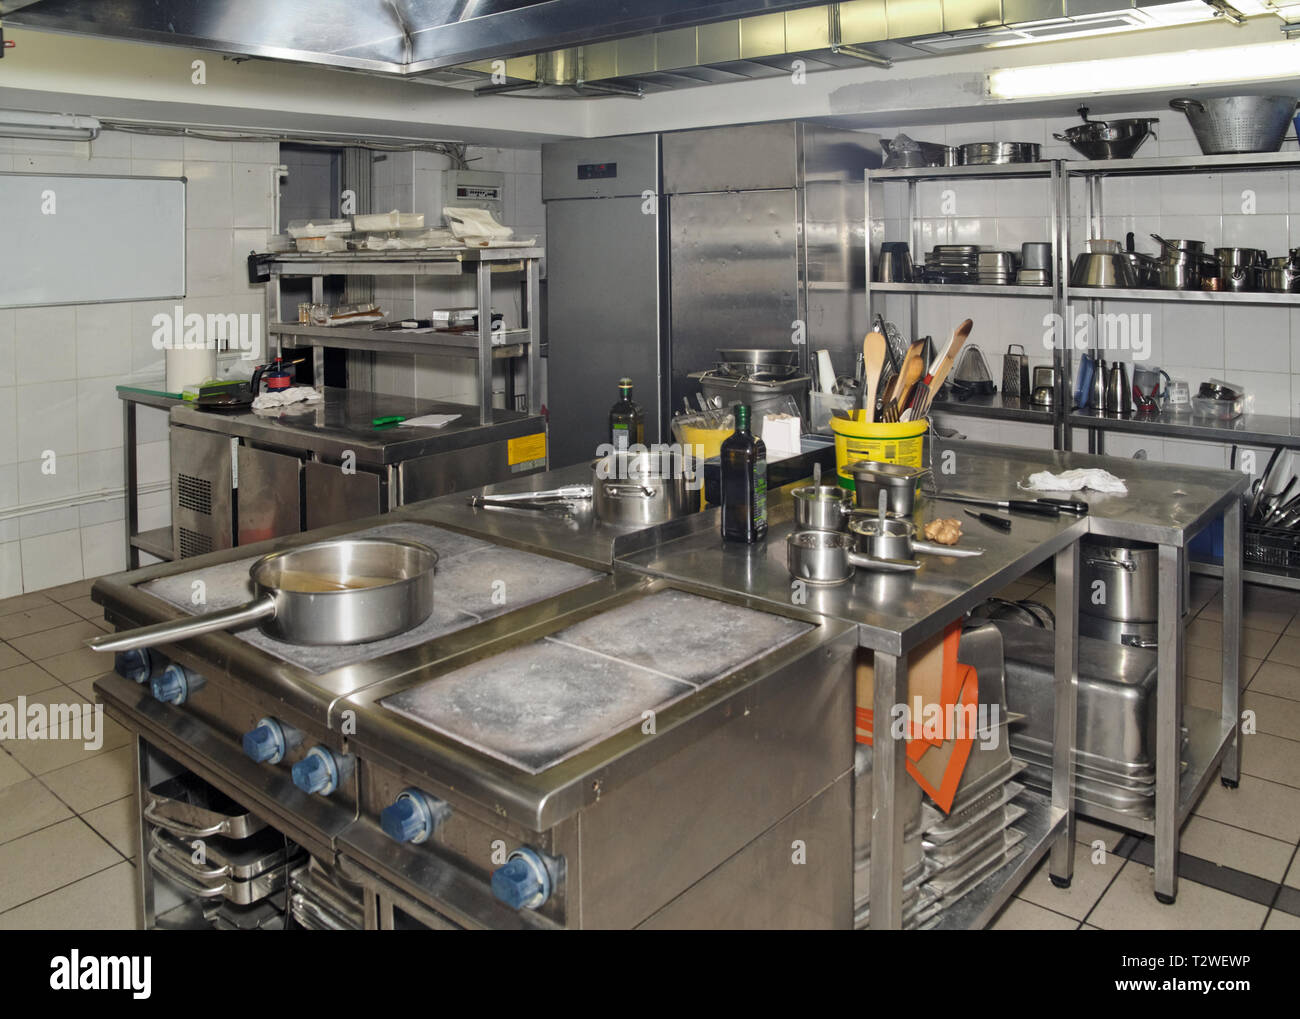 Typical kitchen of a restaurant shot in operation Stock Photo